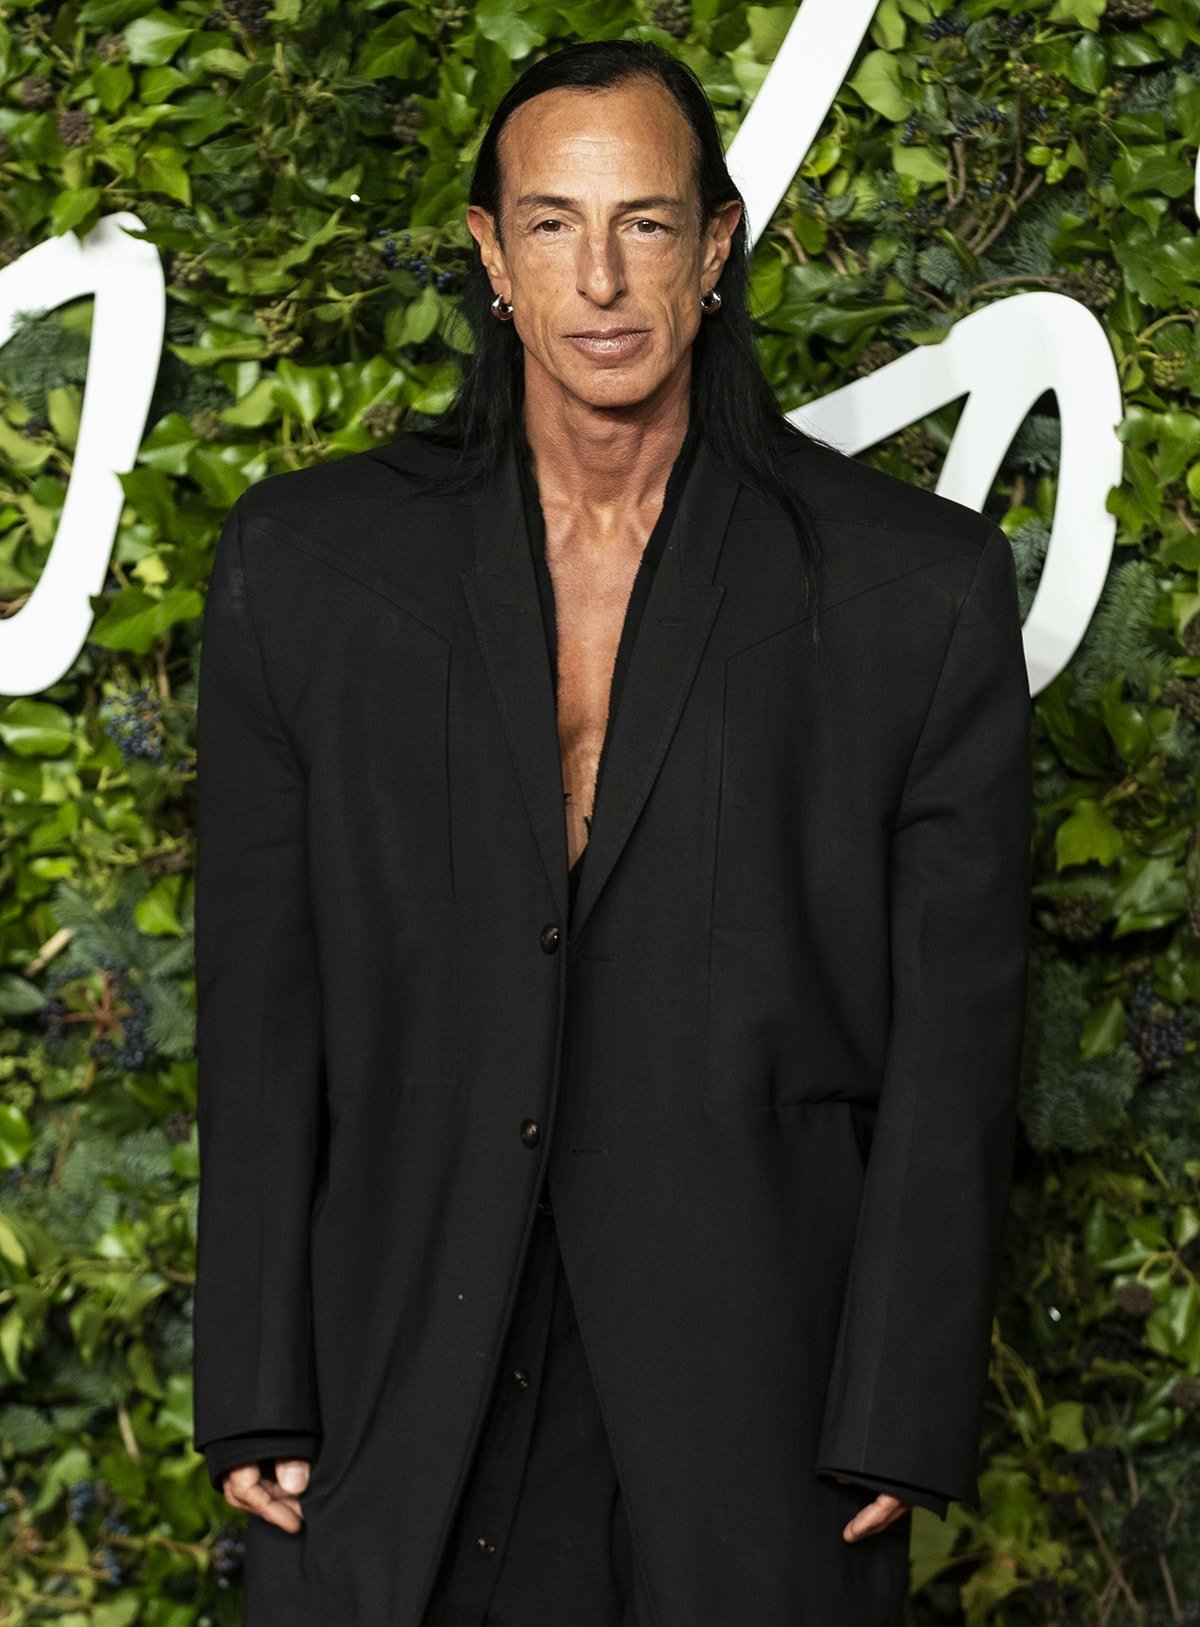 Rick Owens is an American-born Paris-based designer whose gothic aesthetic earned him the nickname The Lord of Darkness